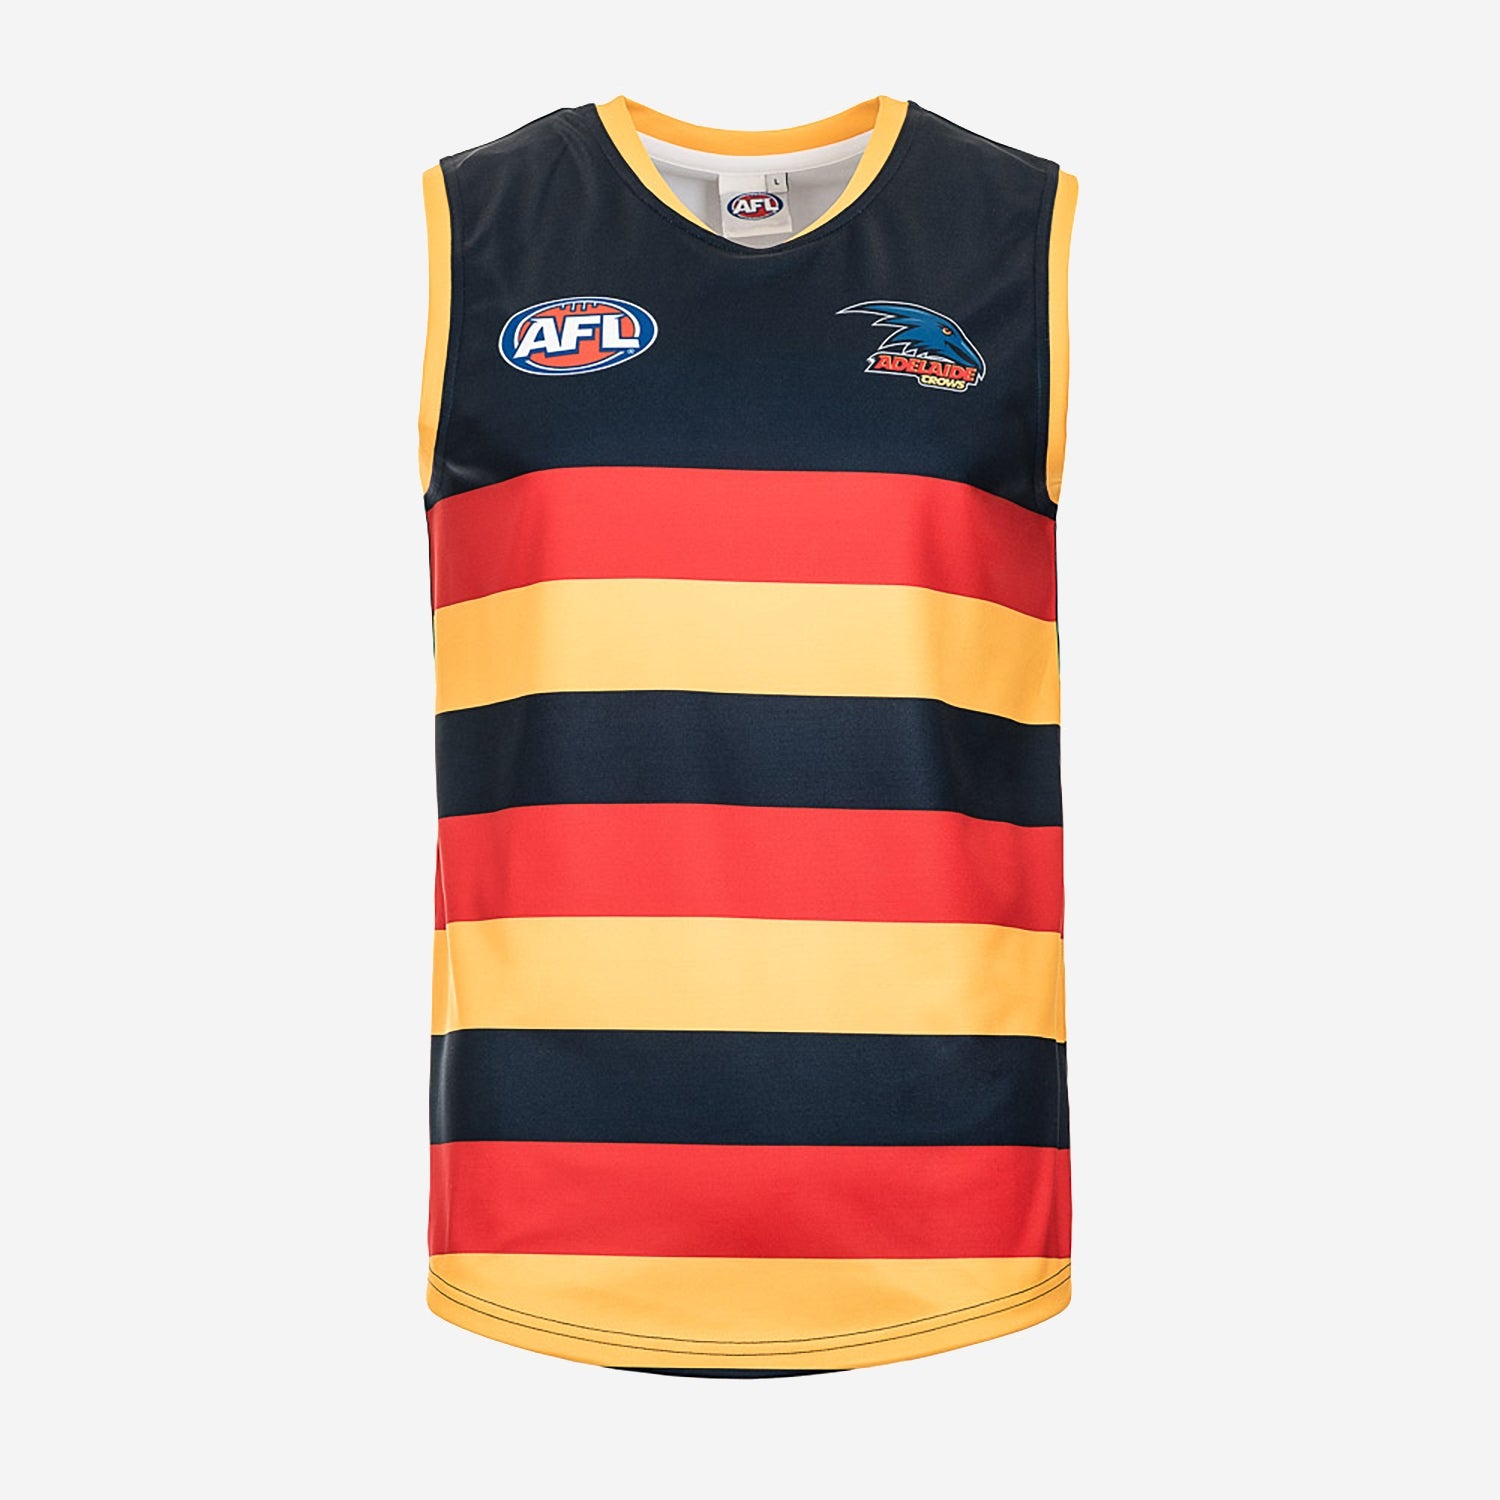 Adelaide Crows - AFL Replica Adult Guernsey - The Cricket Warehouse